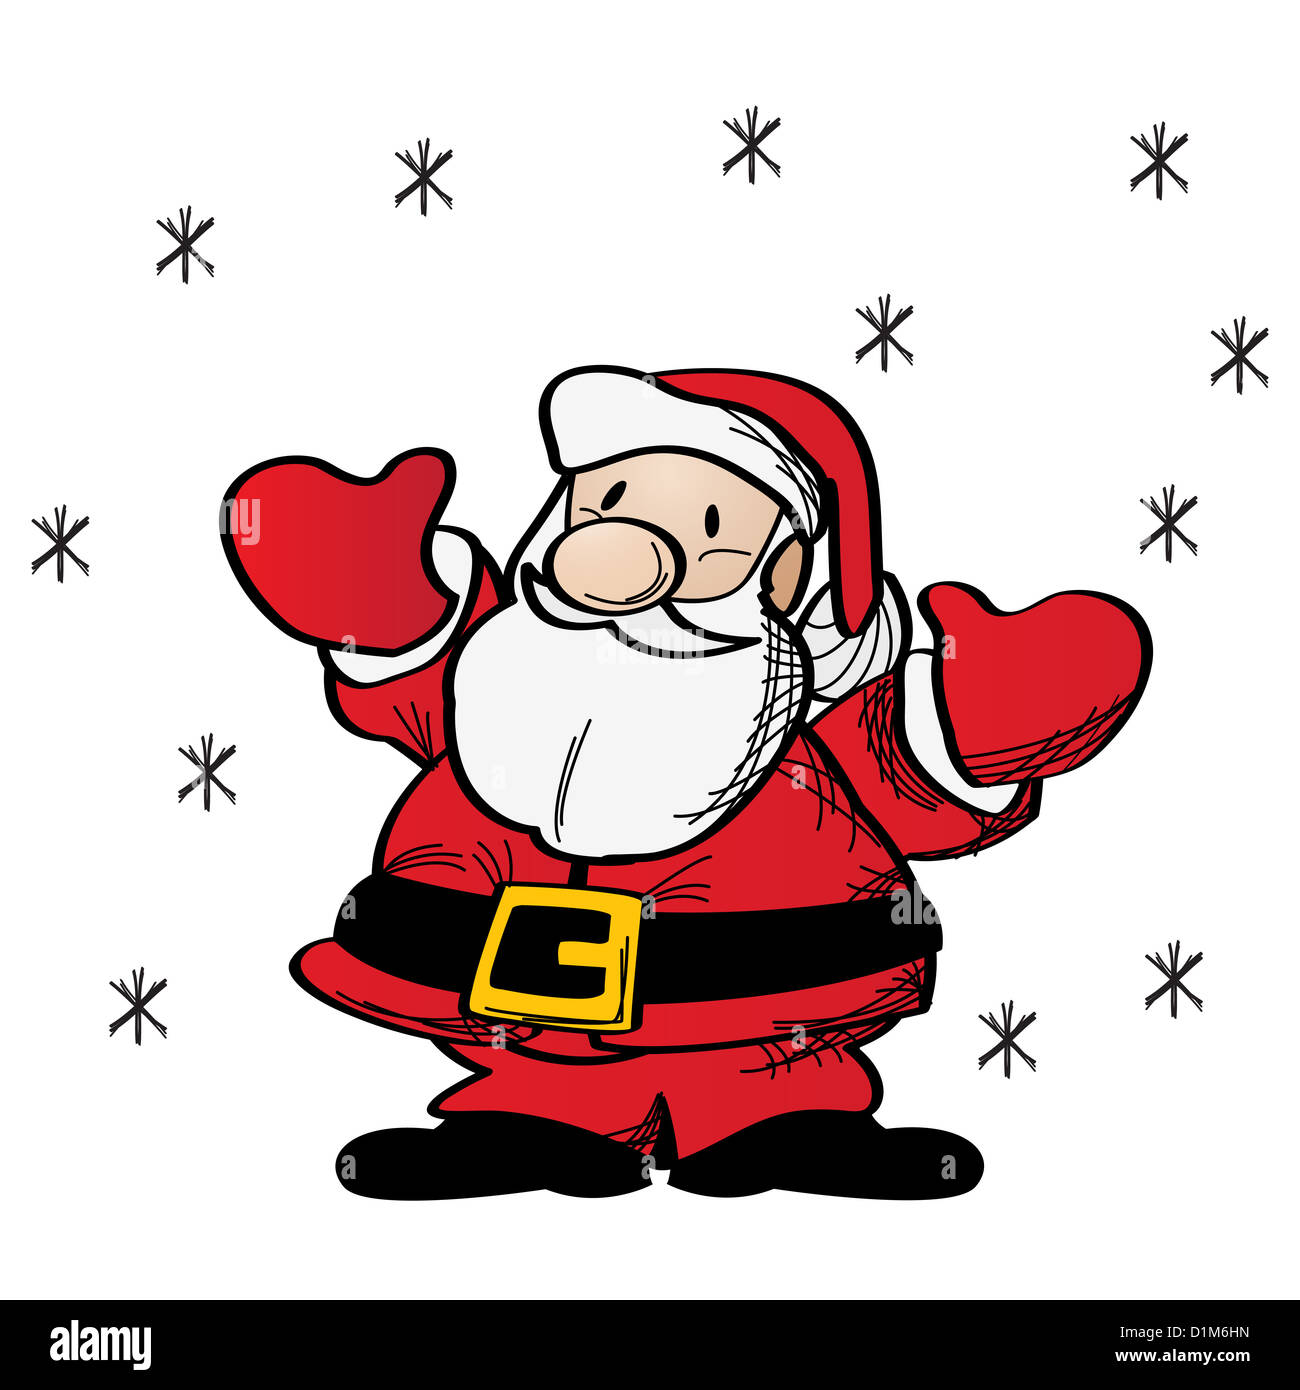 Fat Santa Claus clip art drawing over white Stock Photo - Alamy